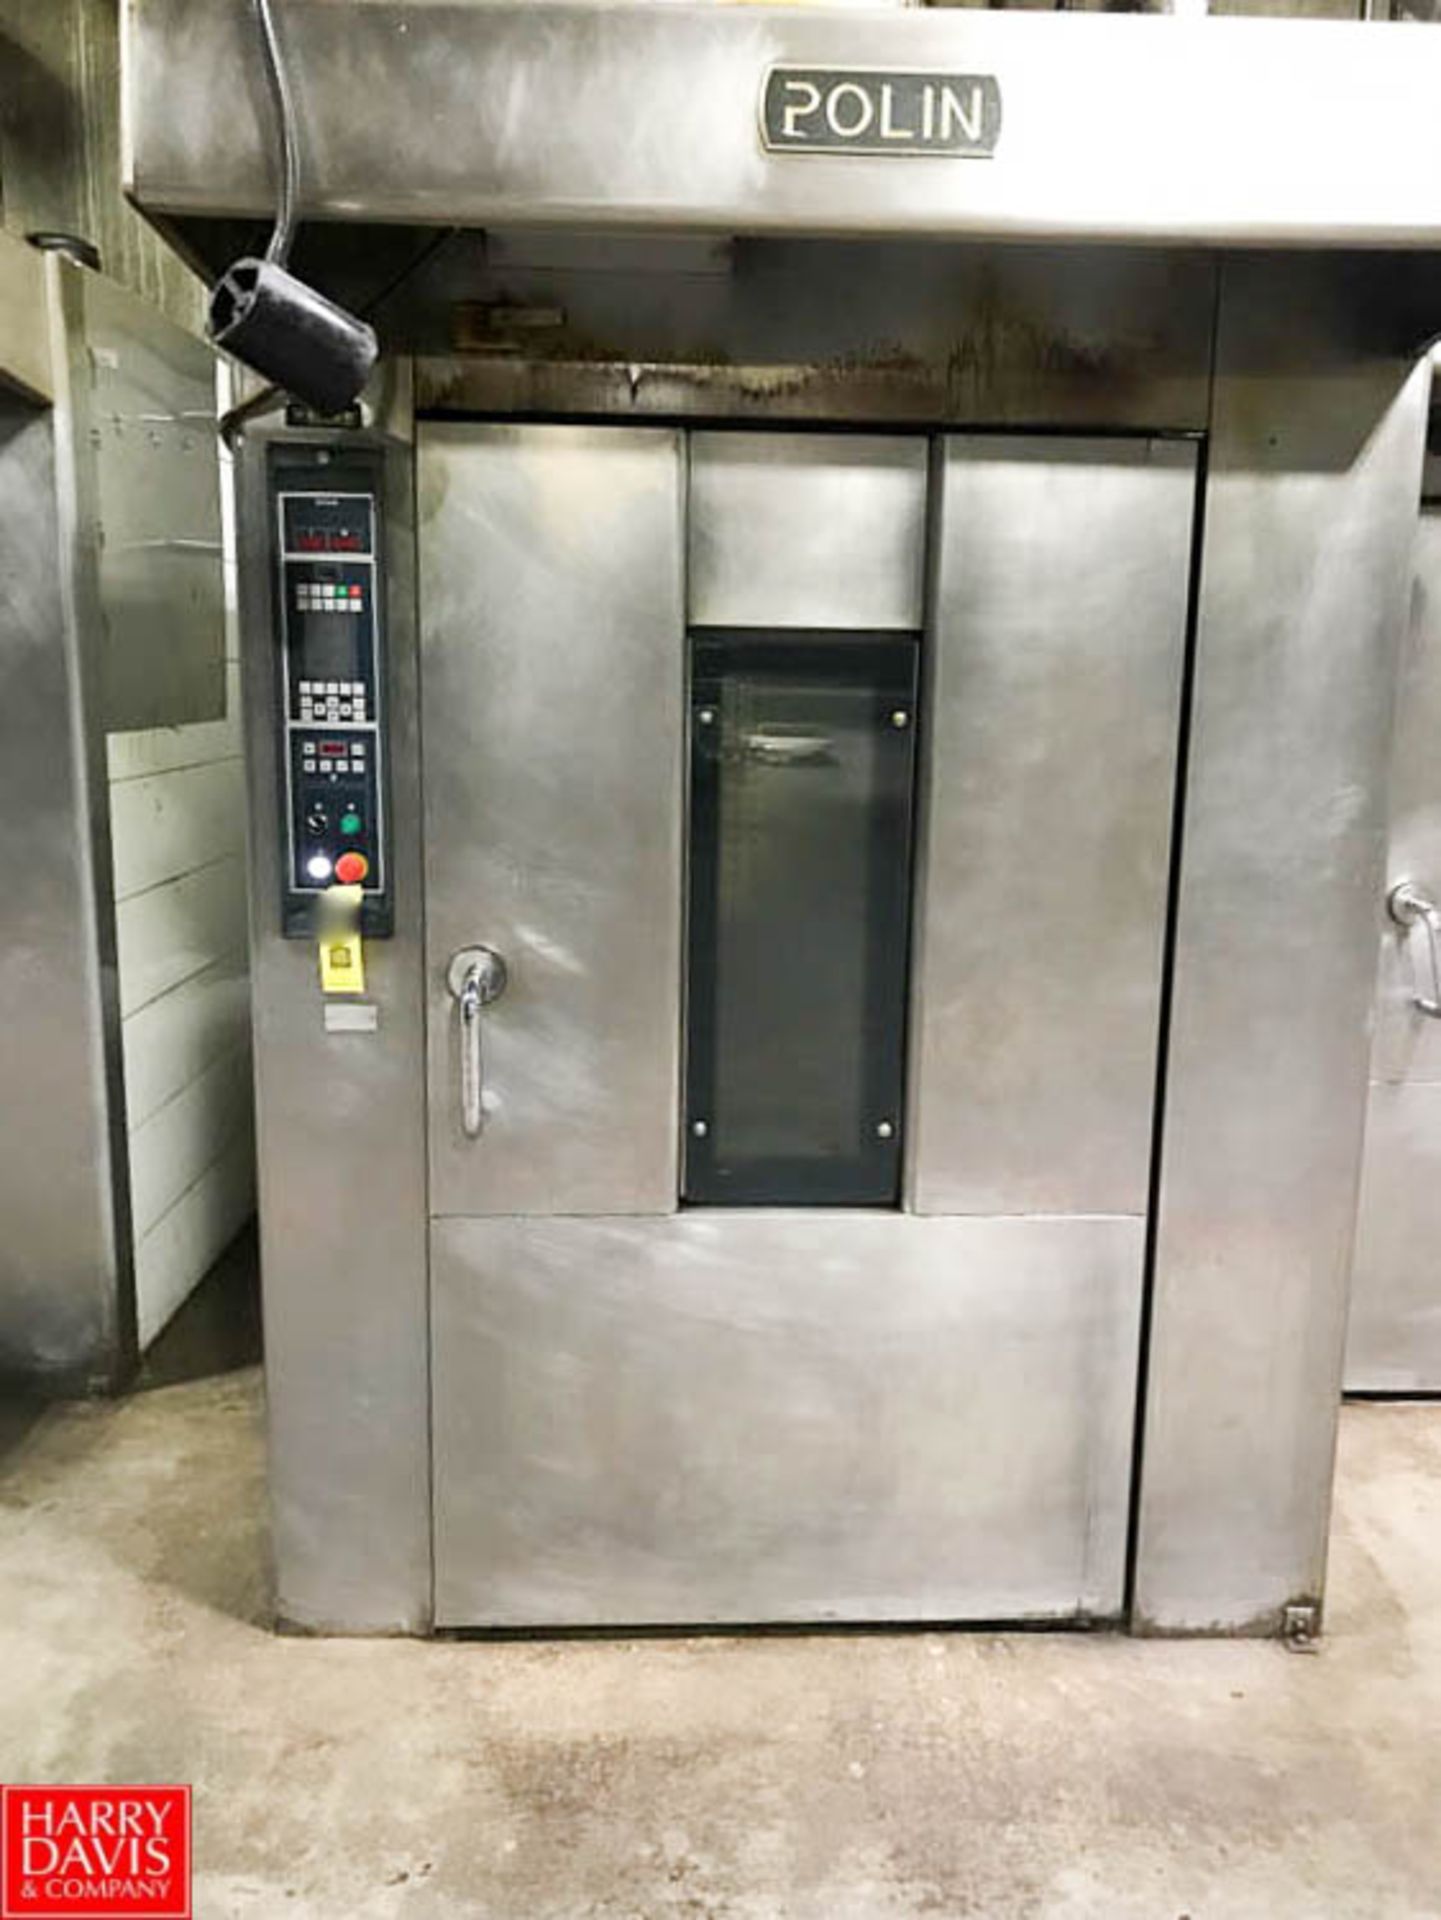 2010 Polin ROTO AVANT Double Rack Rotating Gas-Fired Oven, Model: ROTO 8095'200 SC, S/N: 10041148/